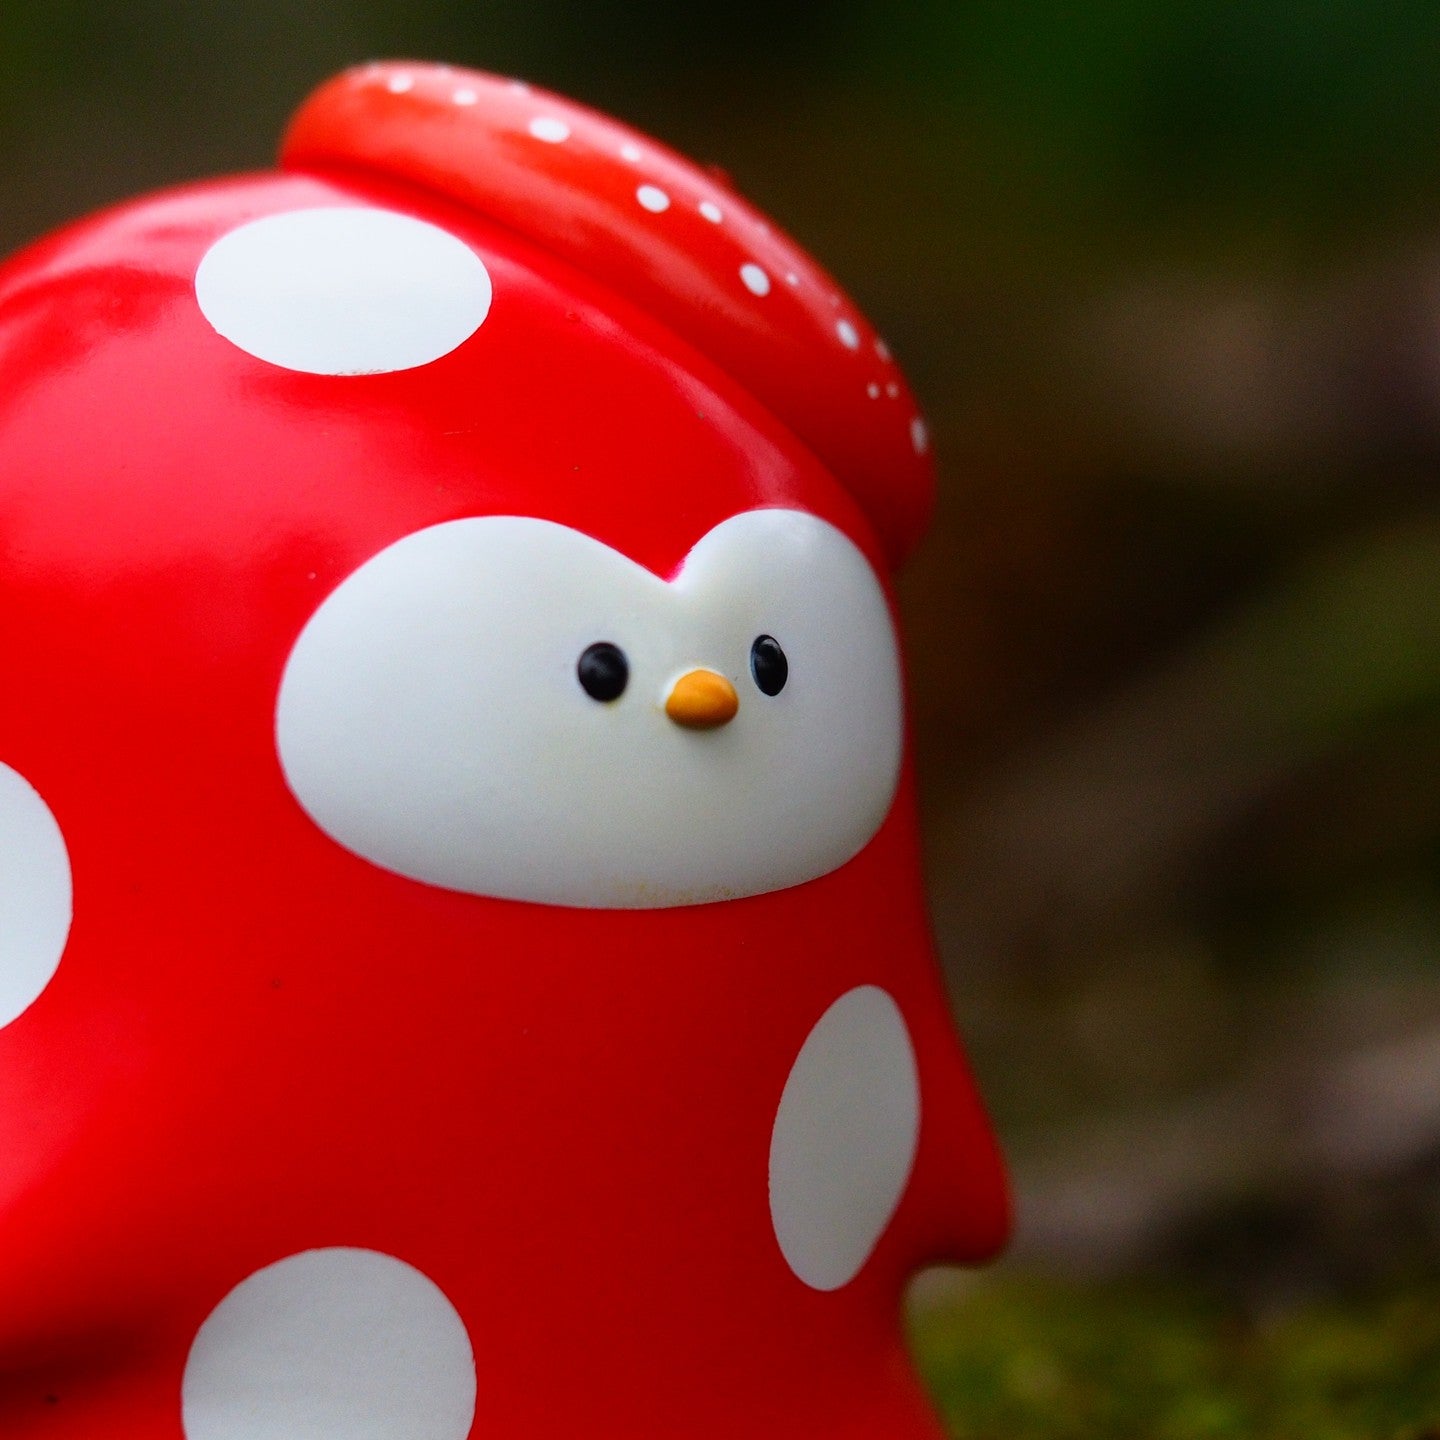 A blind box toy store product: Mushroom Umi preorder. Soft vinyl, 8.5 cm tall. Close-up of red and white toy.